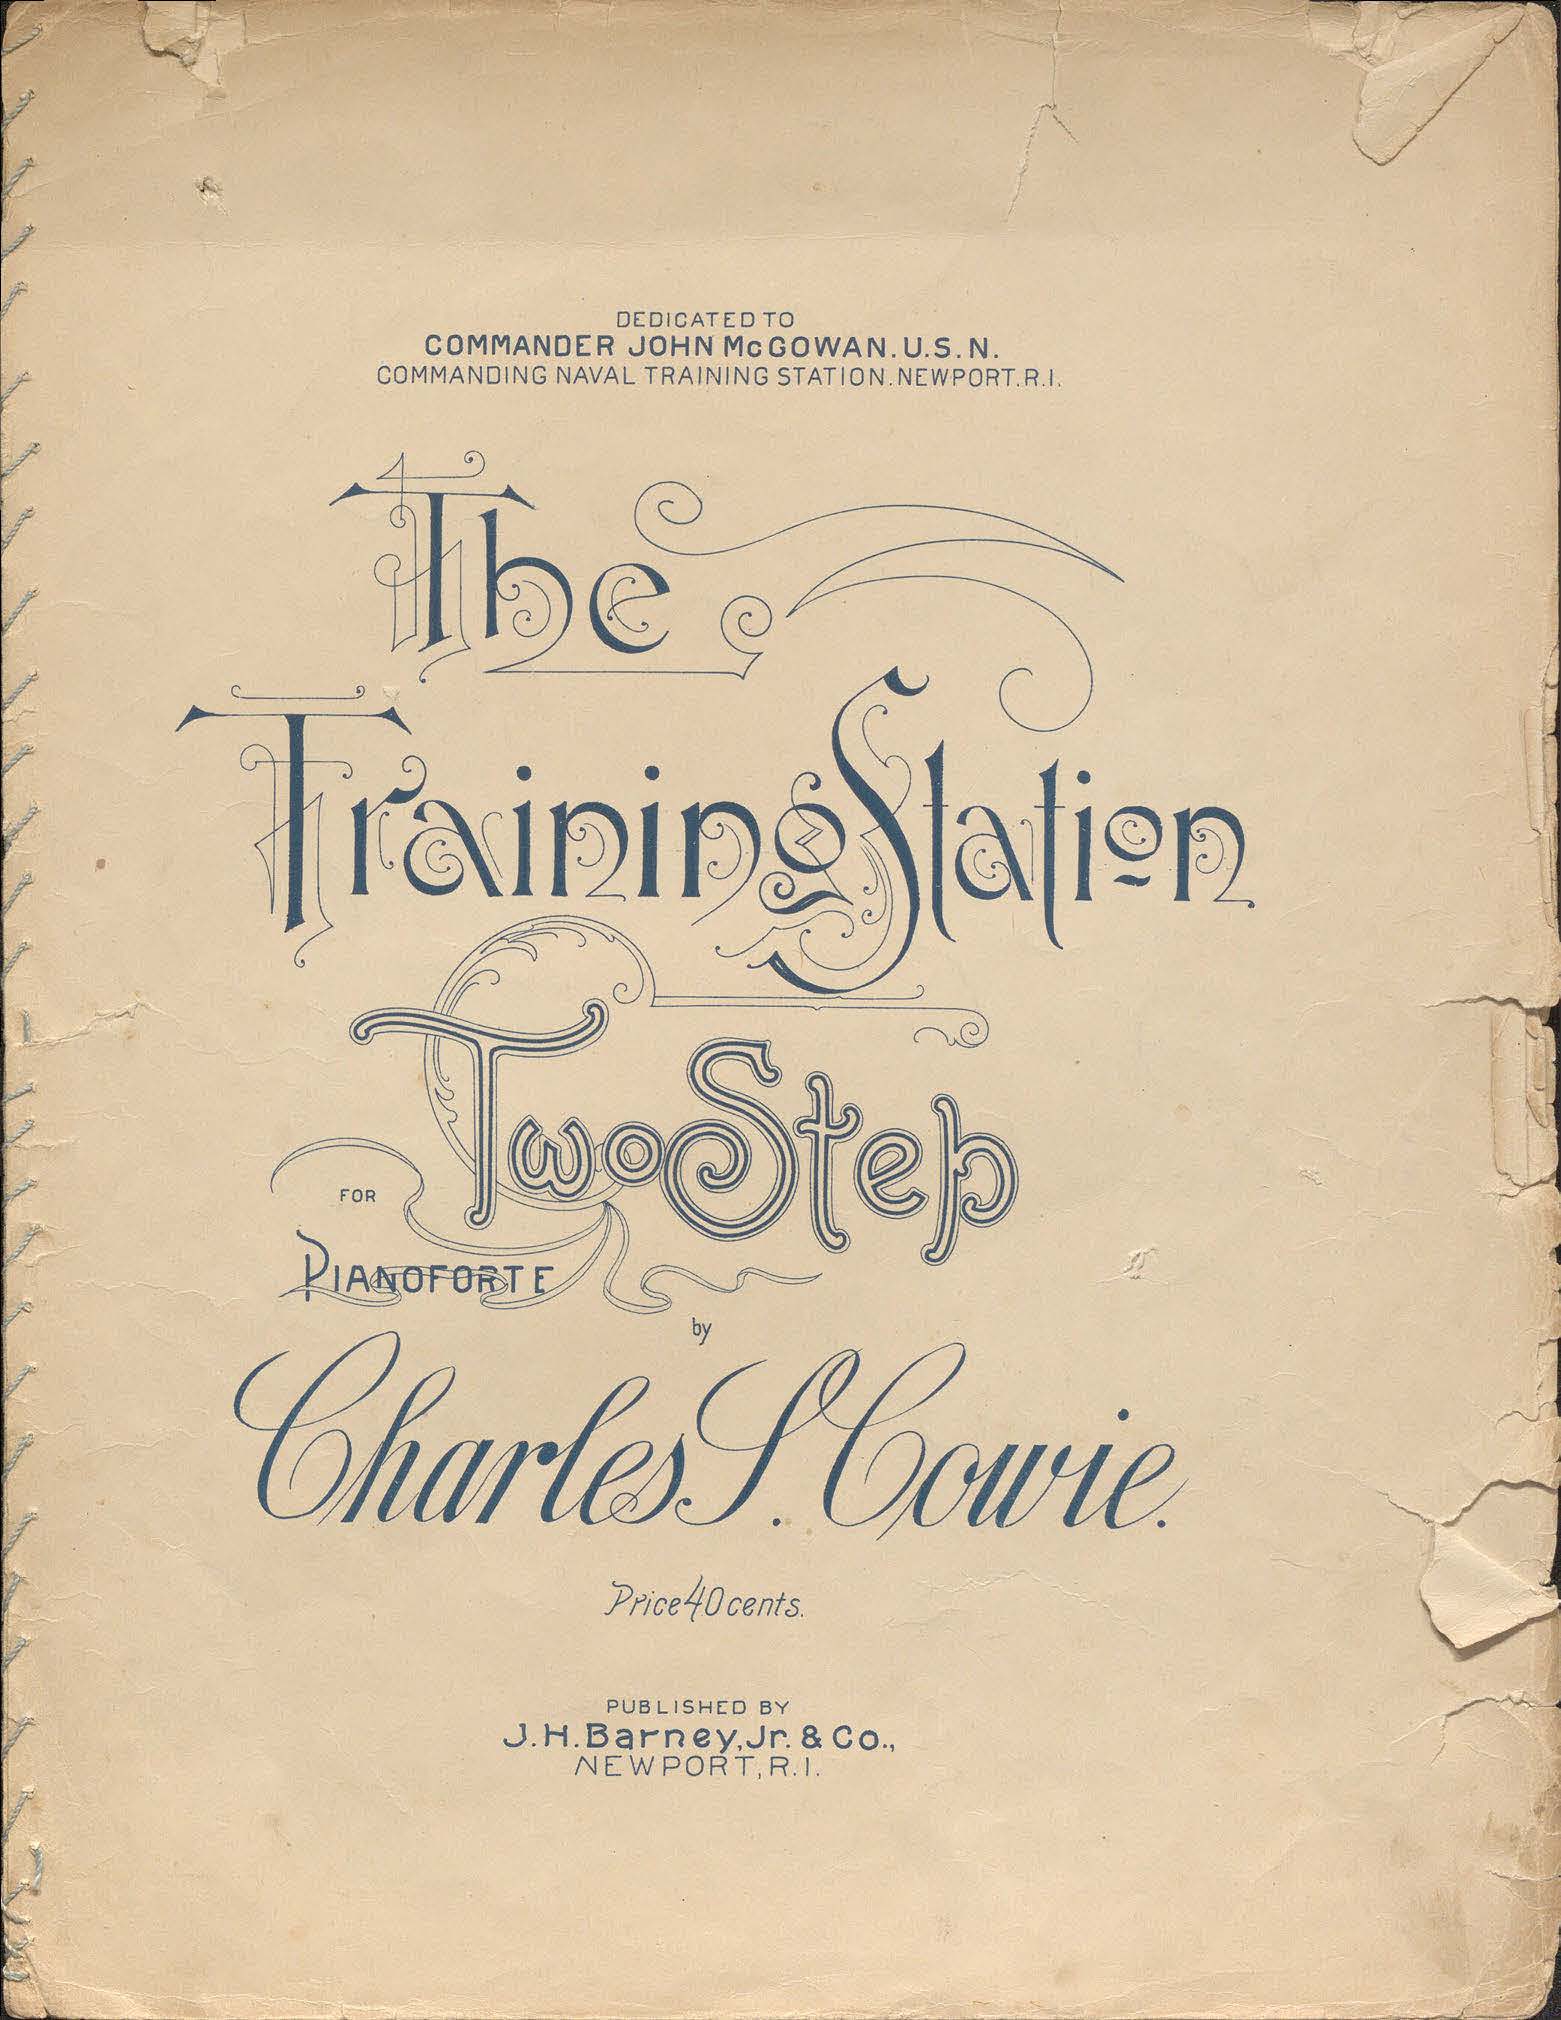 The Training Station Two Step for Pianoforte by Charles S. Cowie